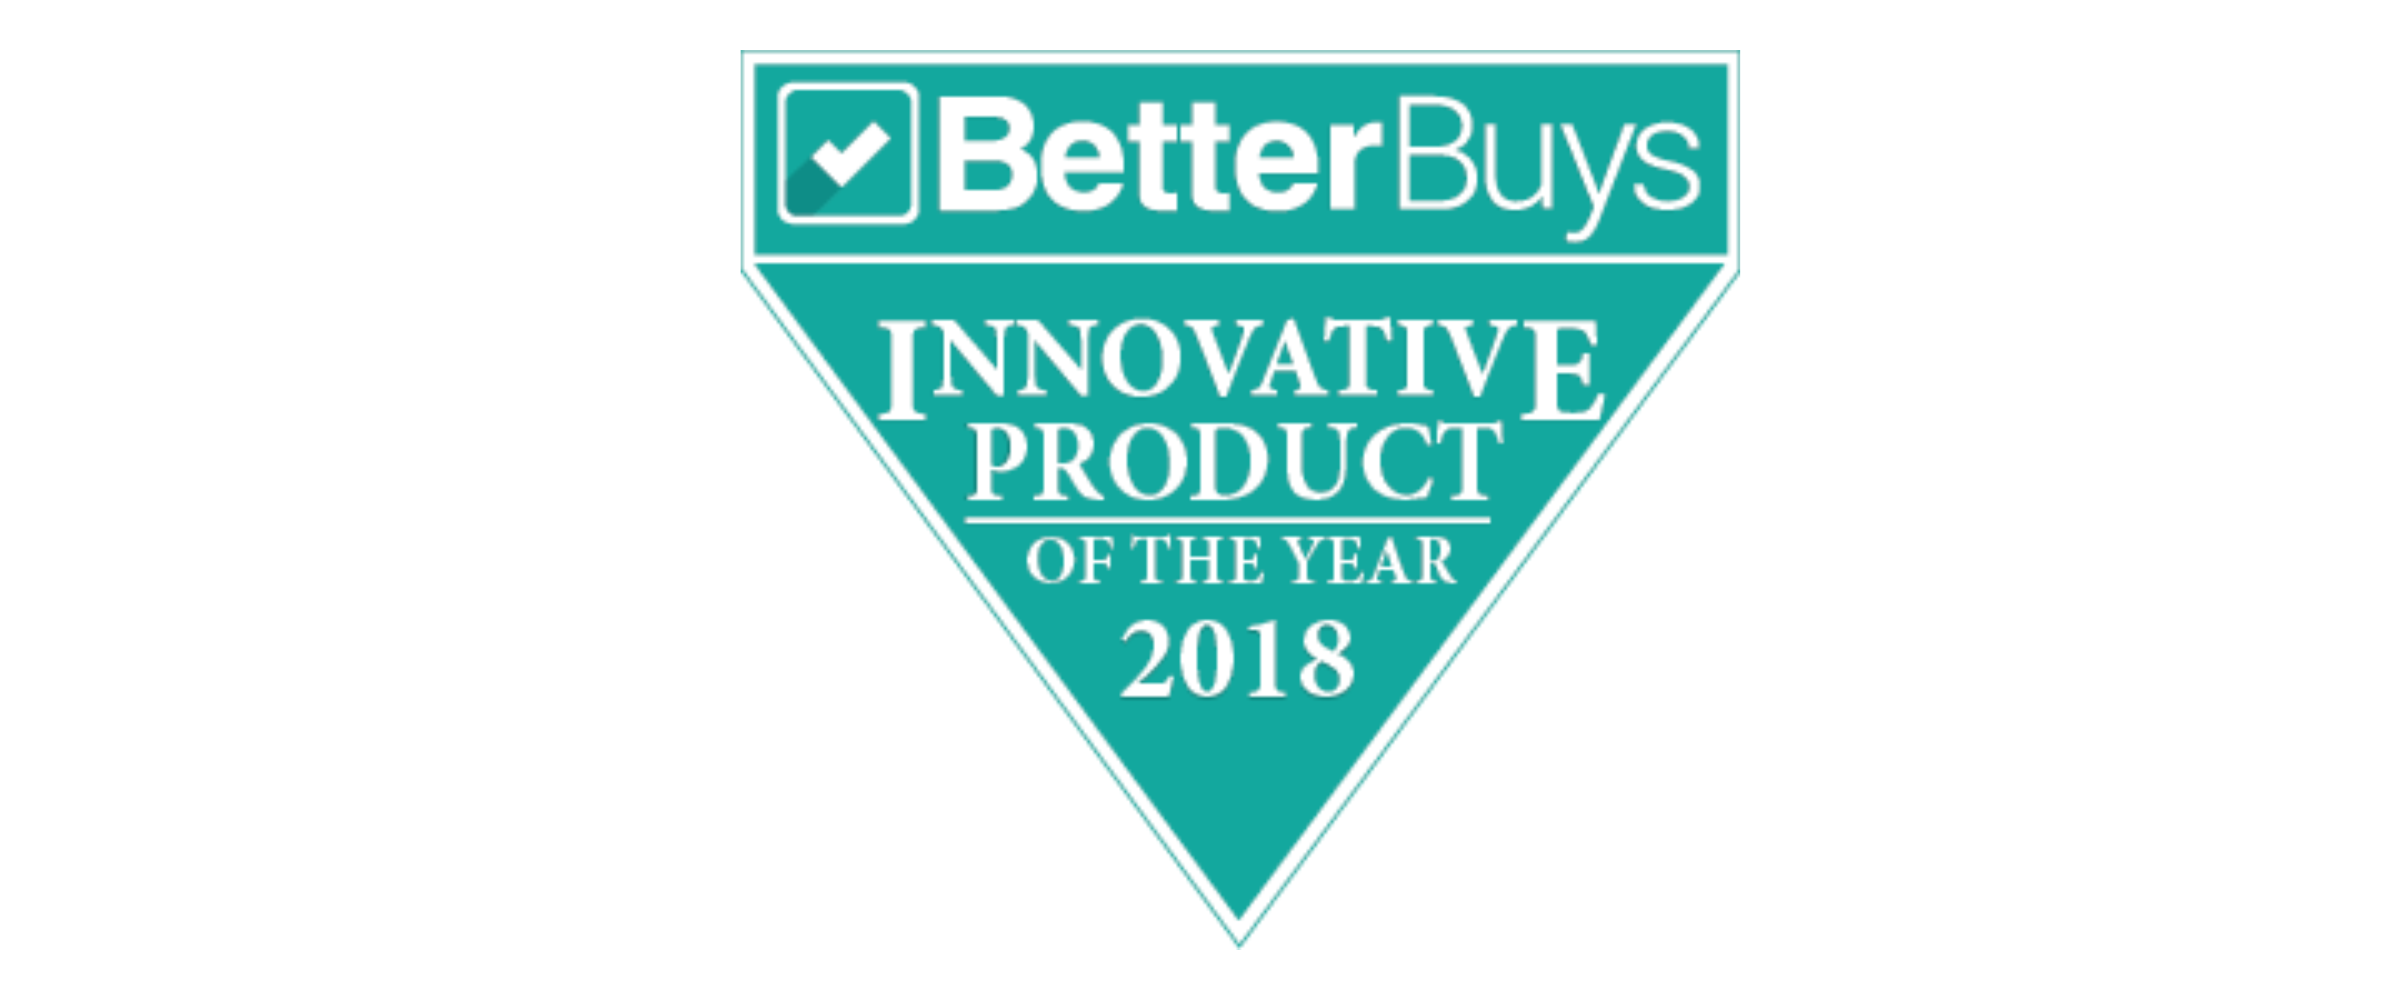 Better Buys Product of the Year Award 2018 Logo